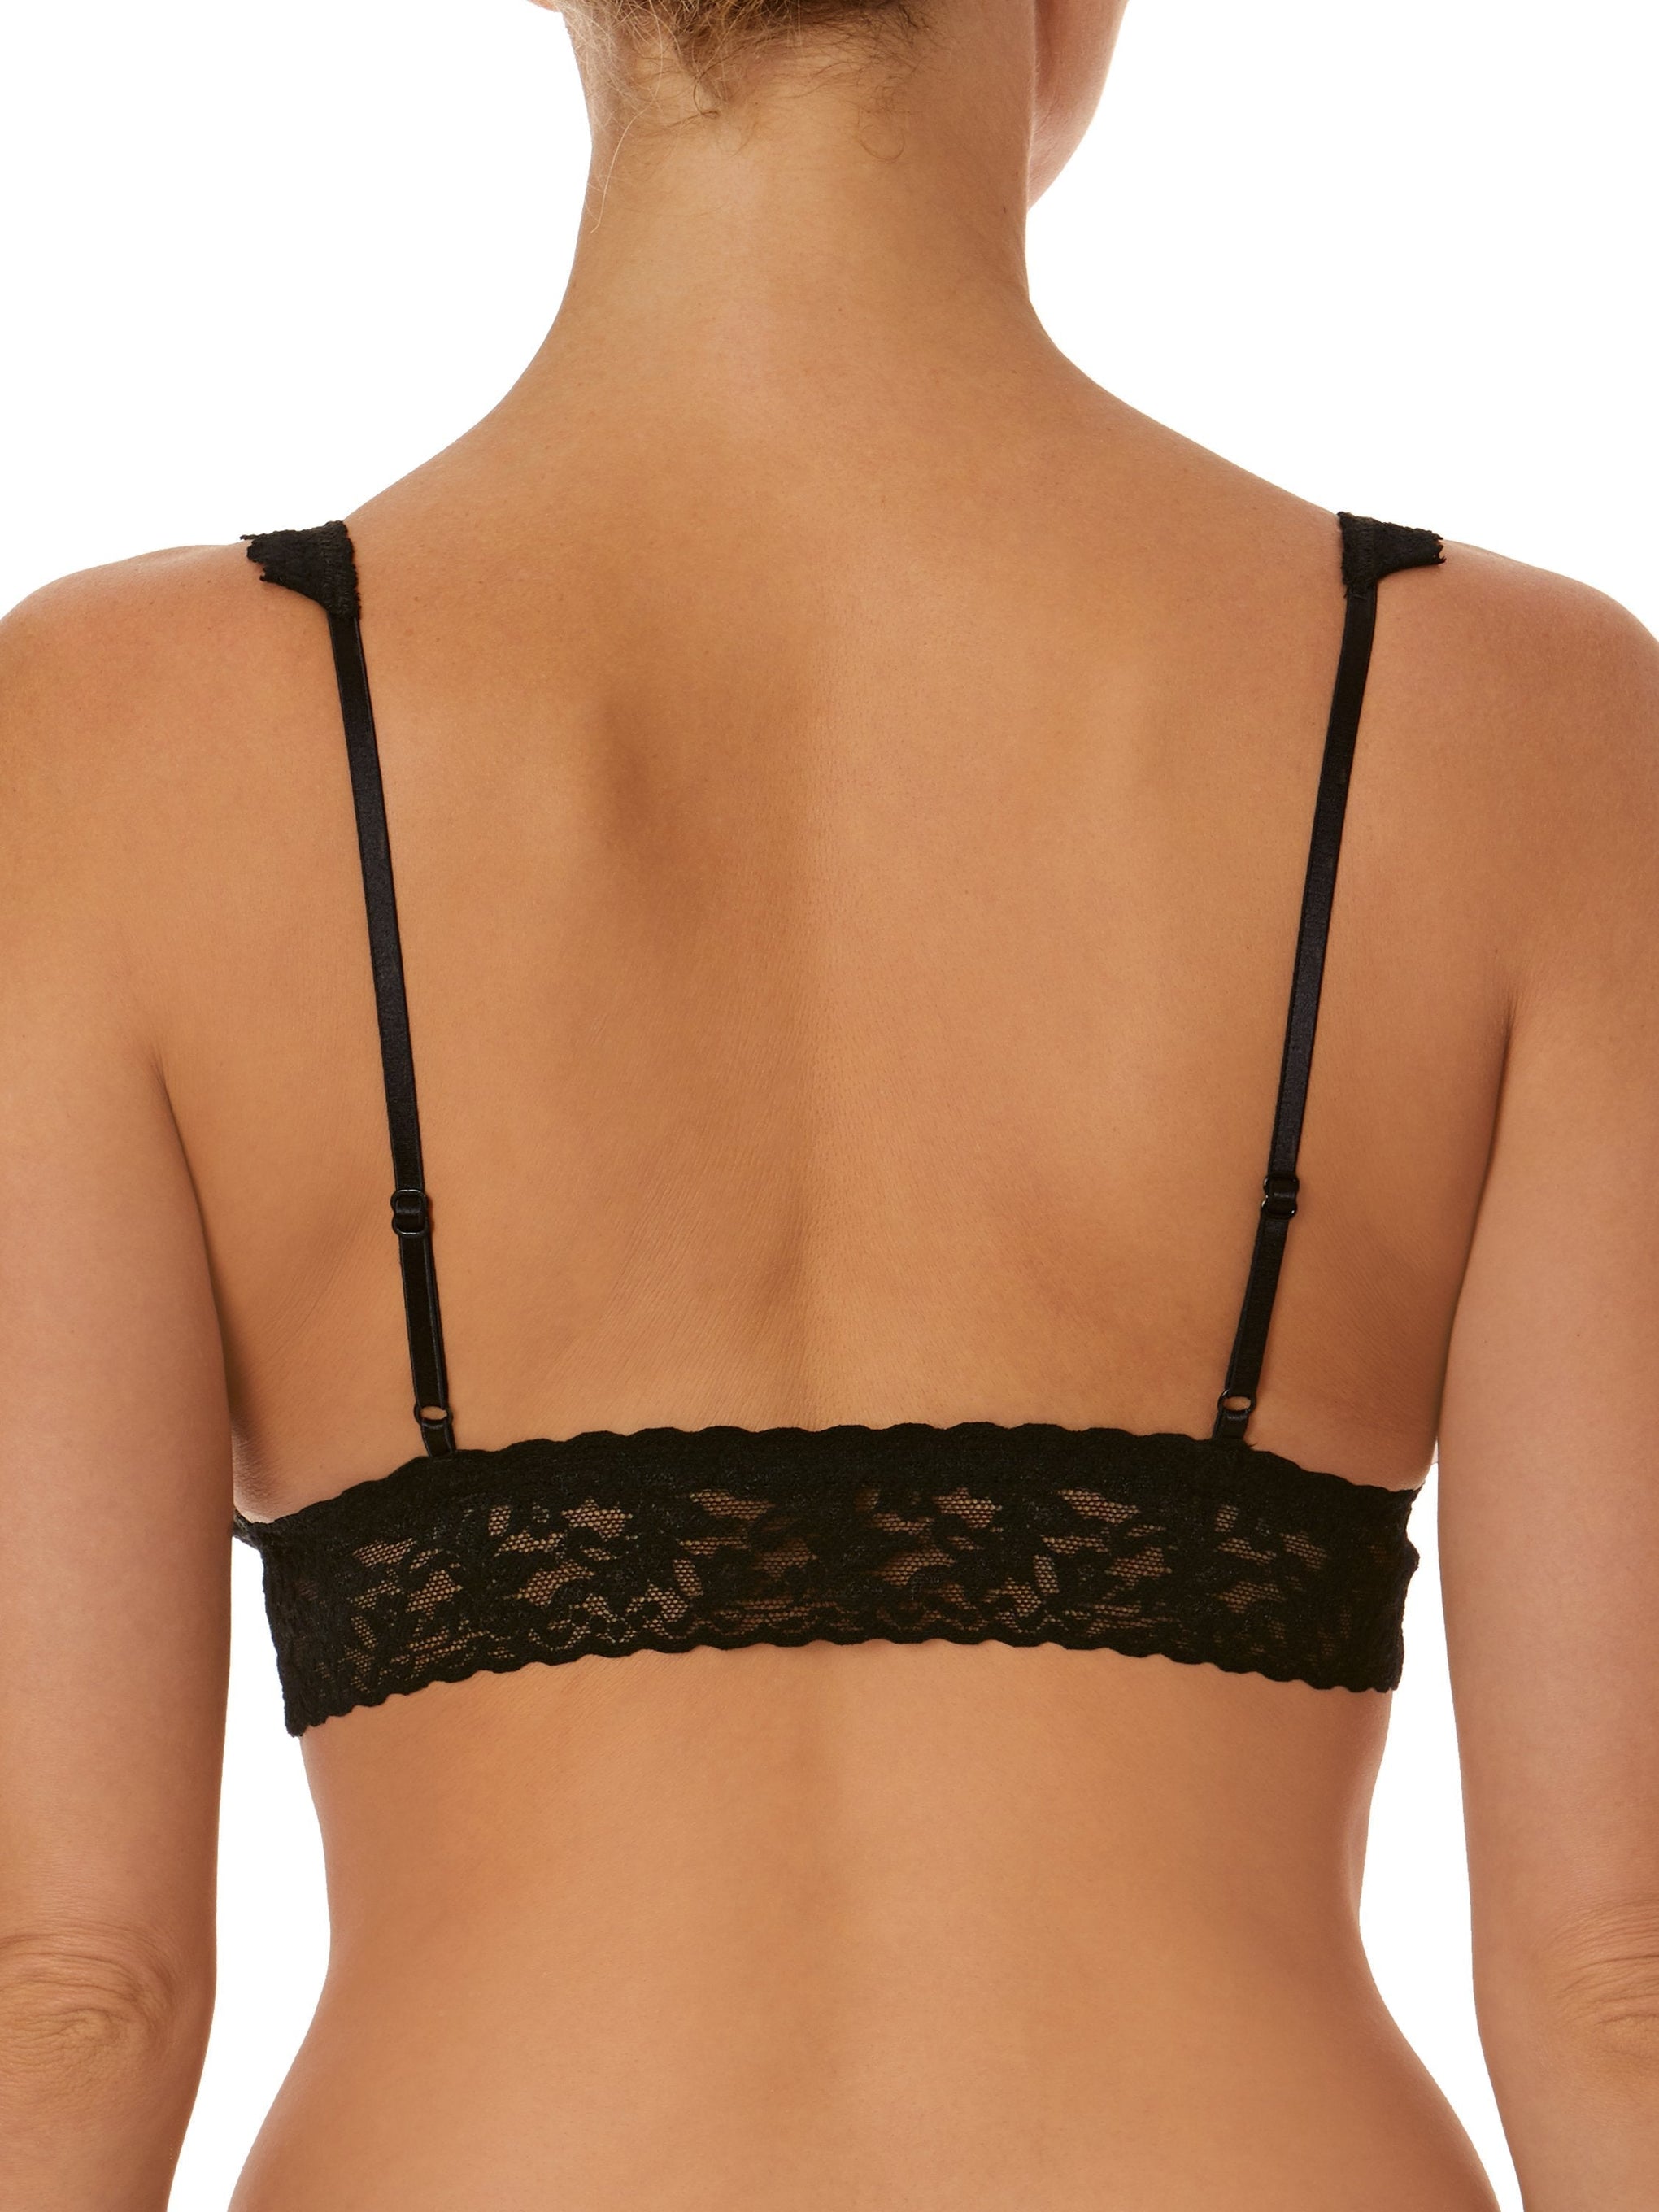 hanky panky Women's After Midnight Open Bralette, Black, S at   Women's Clothing store: Adult Exotic Bras